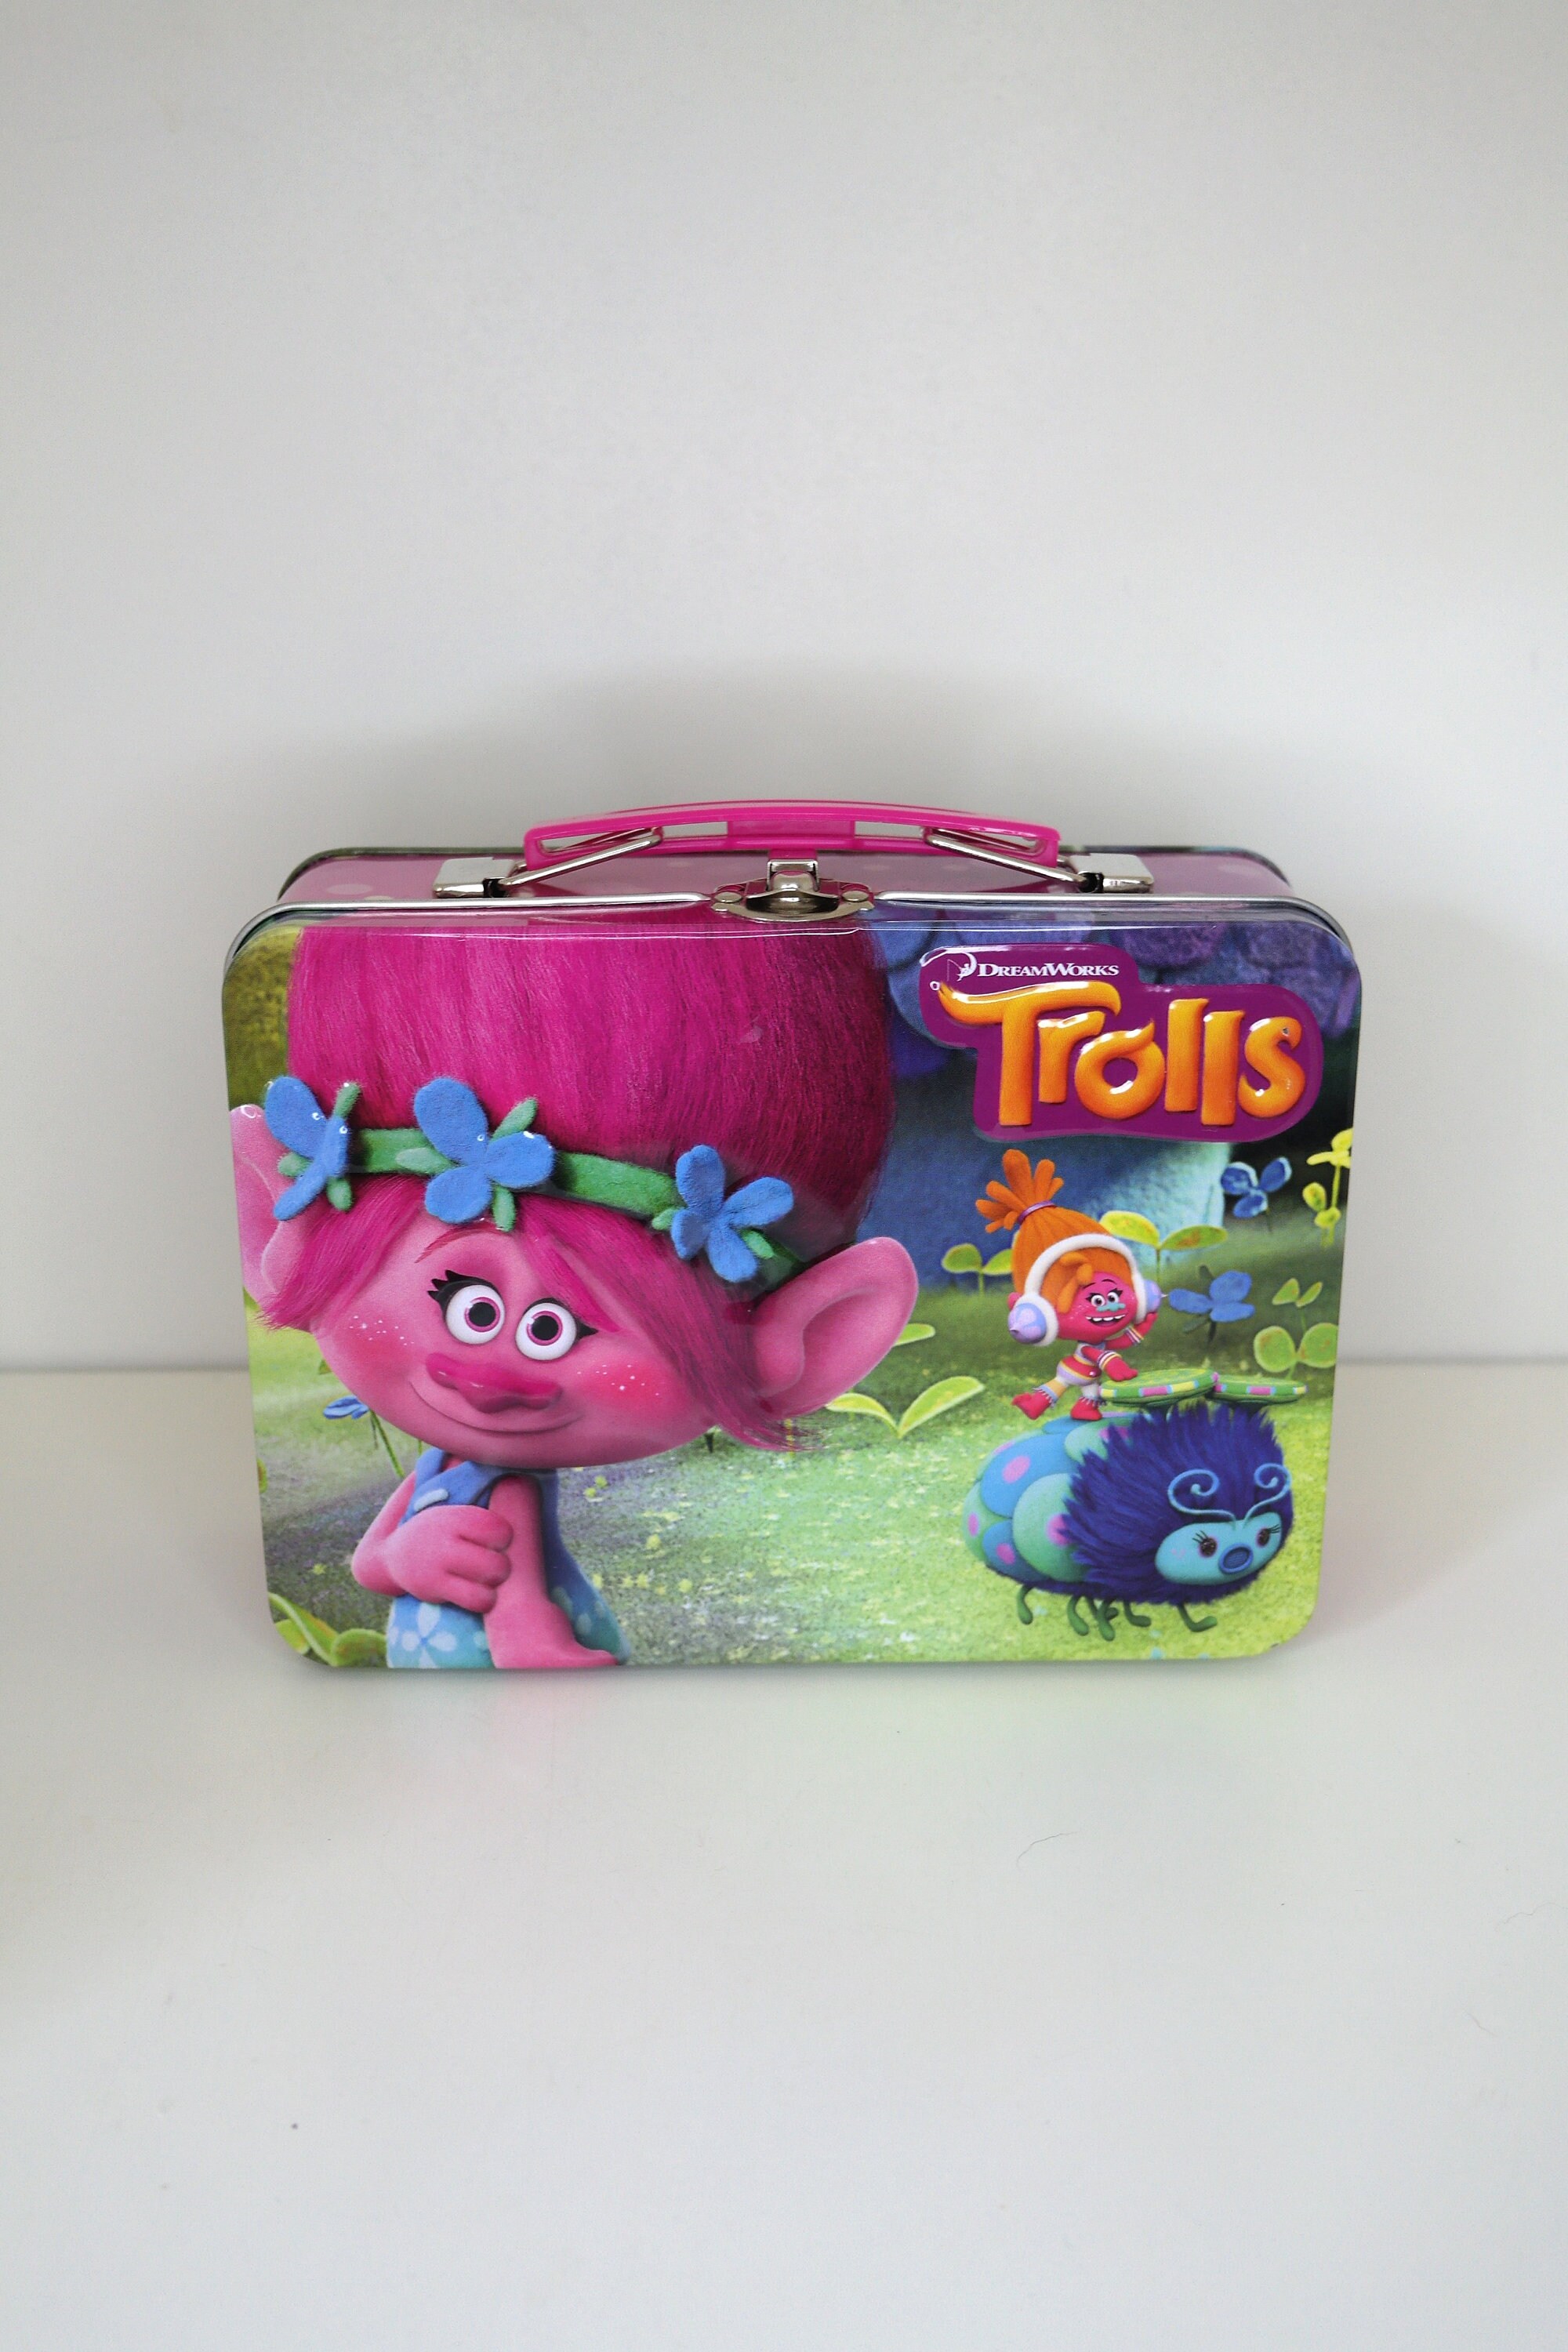  Dreamworks Trolls Insulated Lunch Bag - Lunch Box - Poppy's Fun  Day : Home & Kitchen